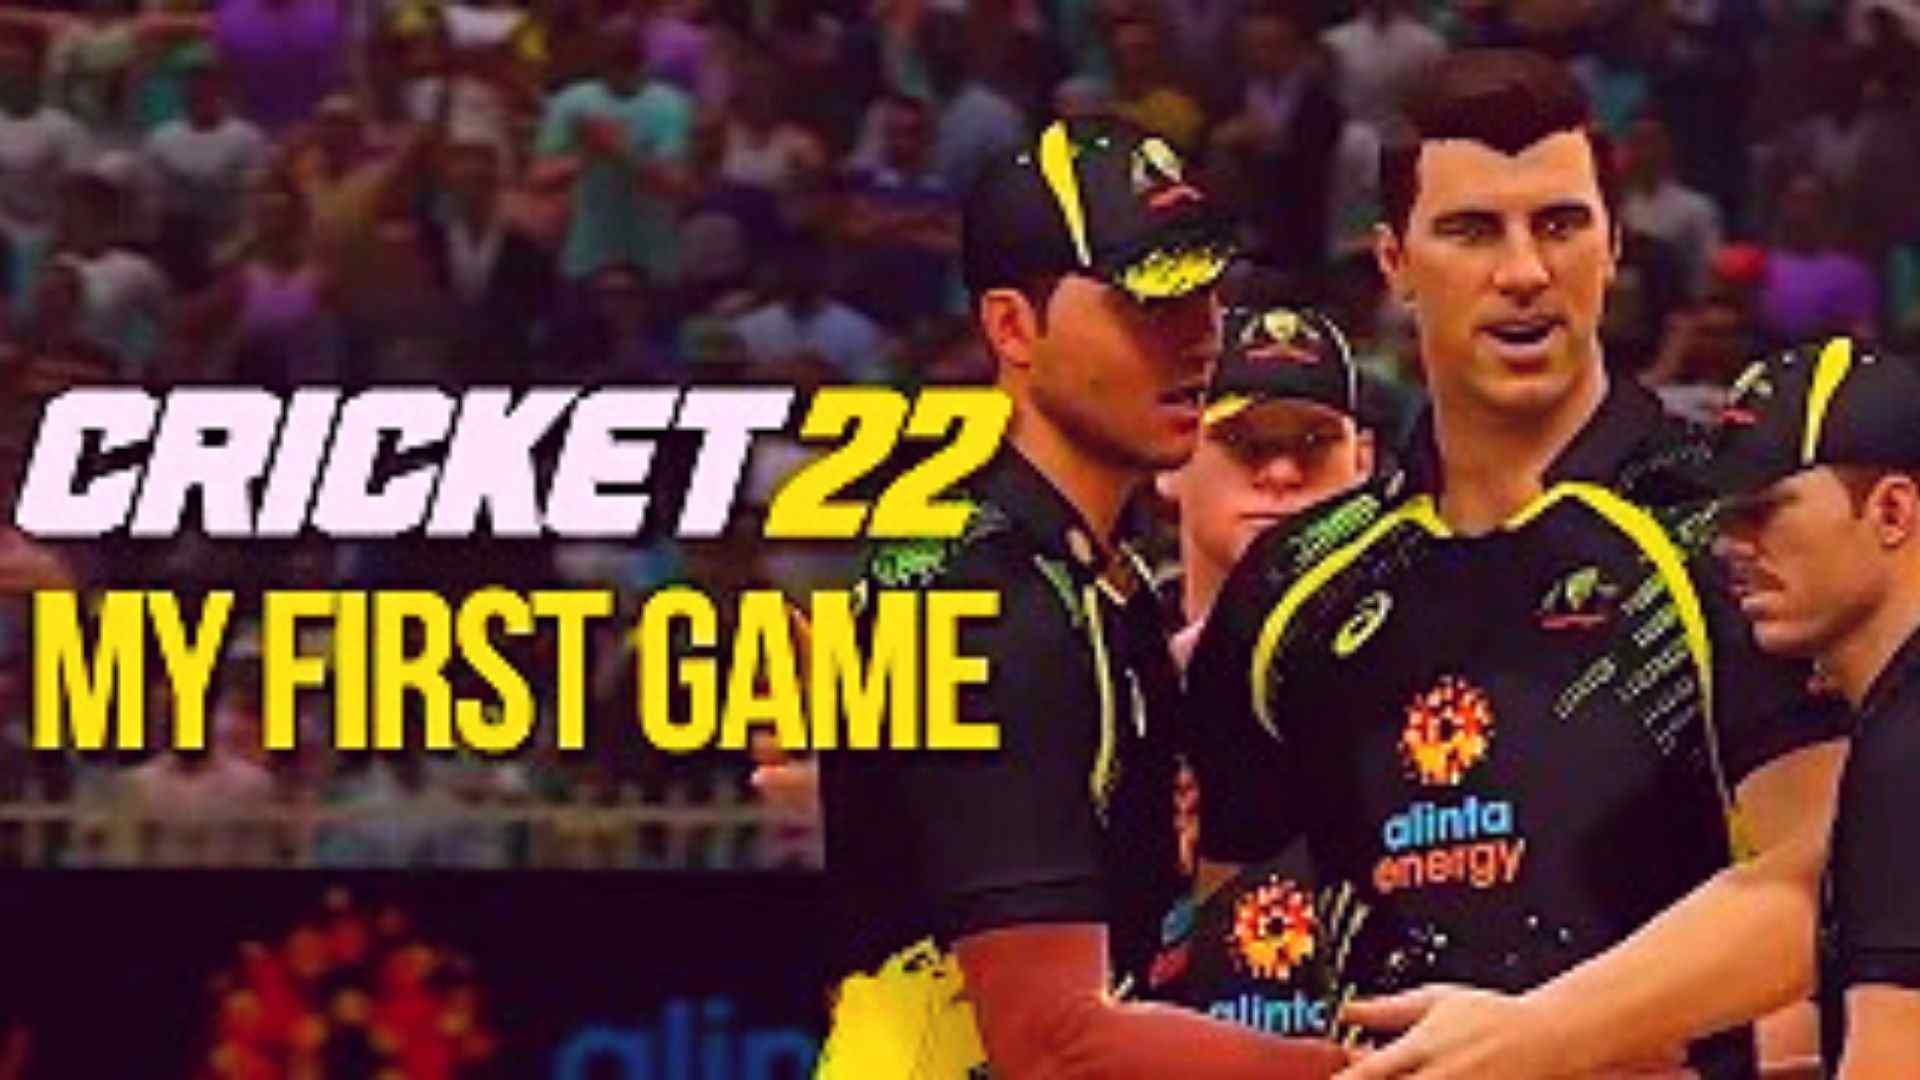 Cricket 22 Age Rating and Parents Guide, Gameplay, System Requirements